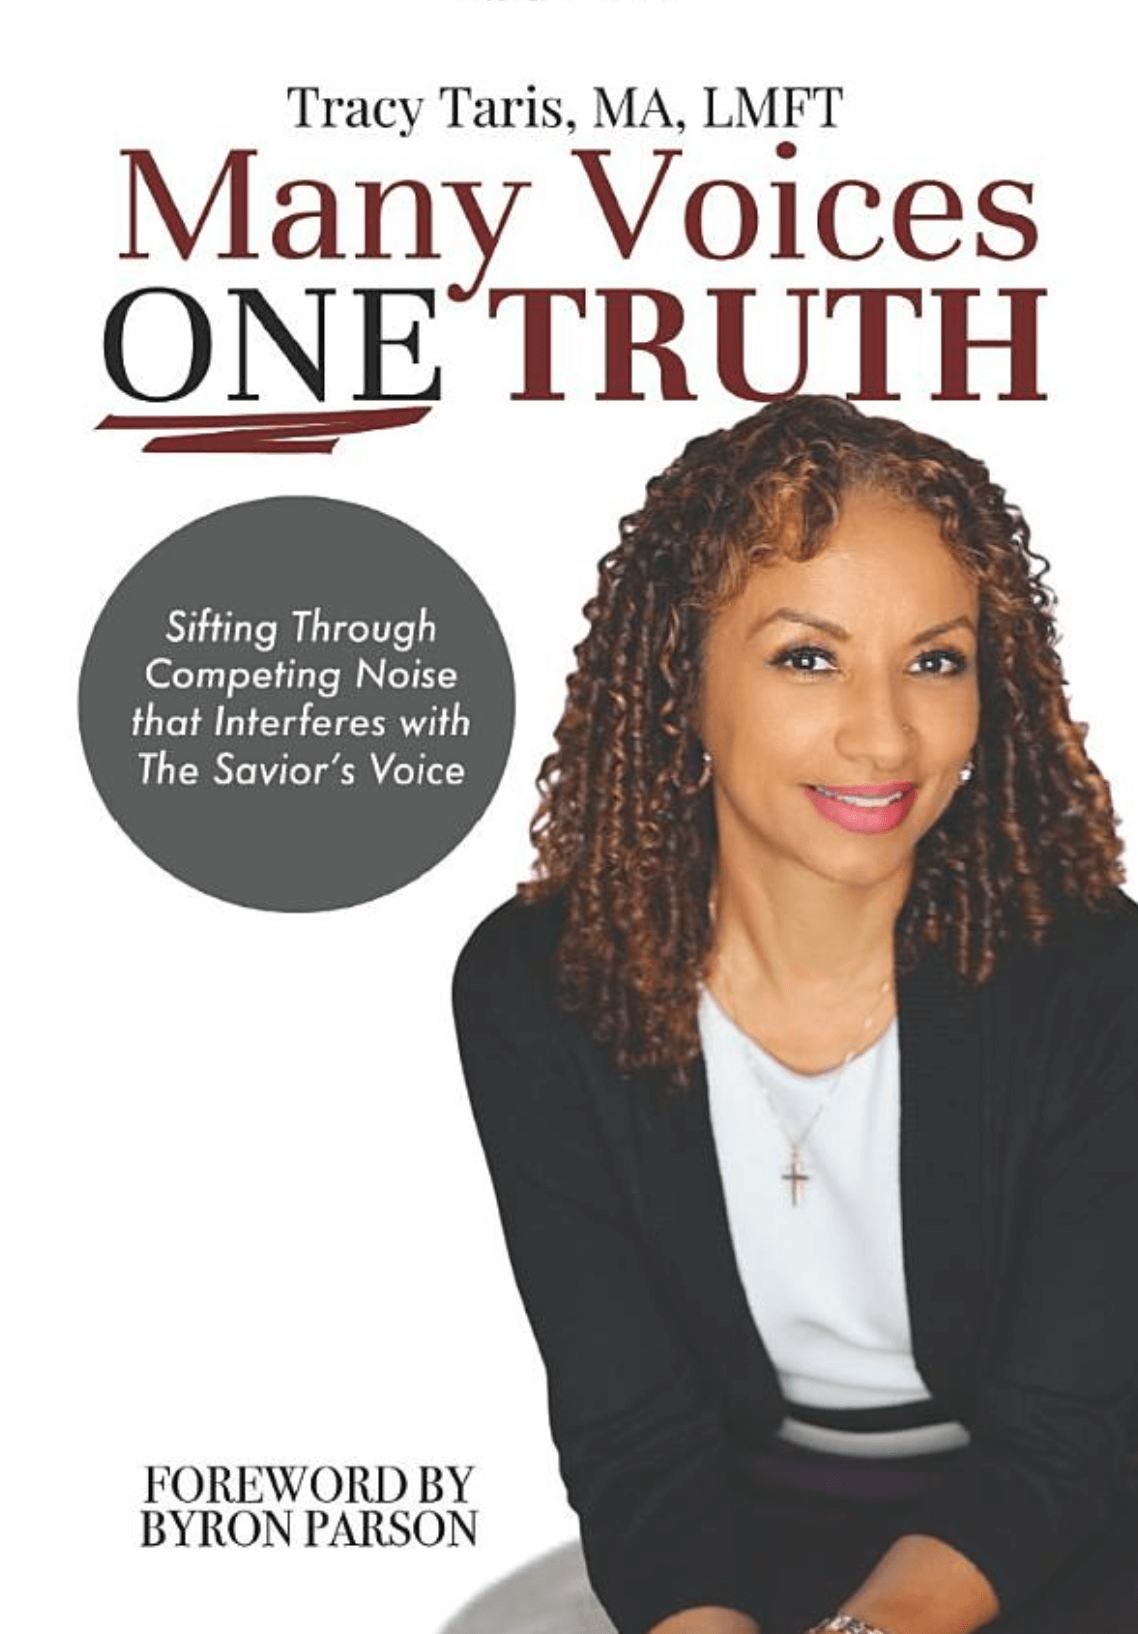 Many_Voices_One_Truth_Cover8ehha.png